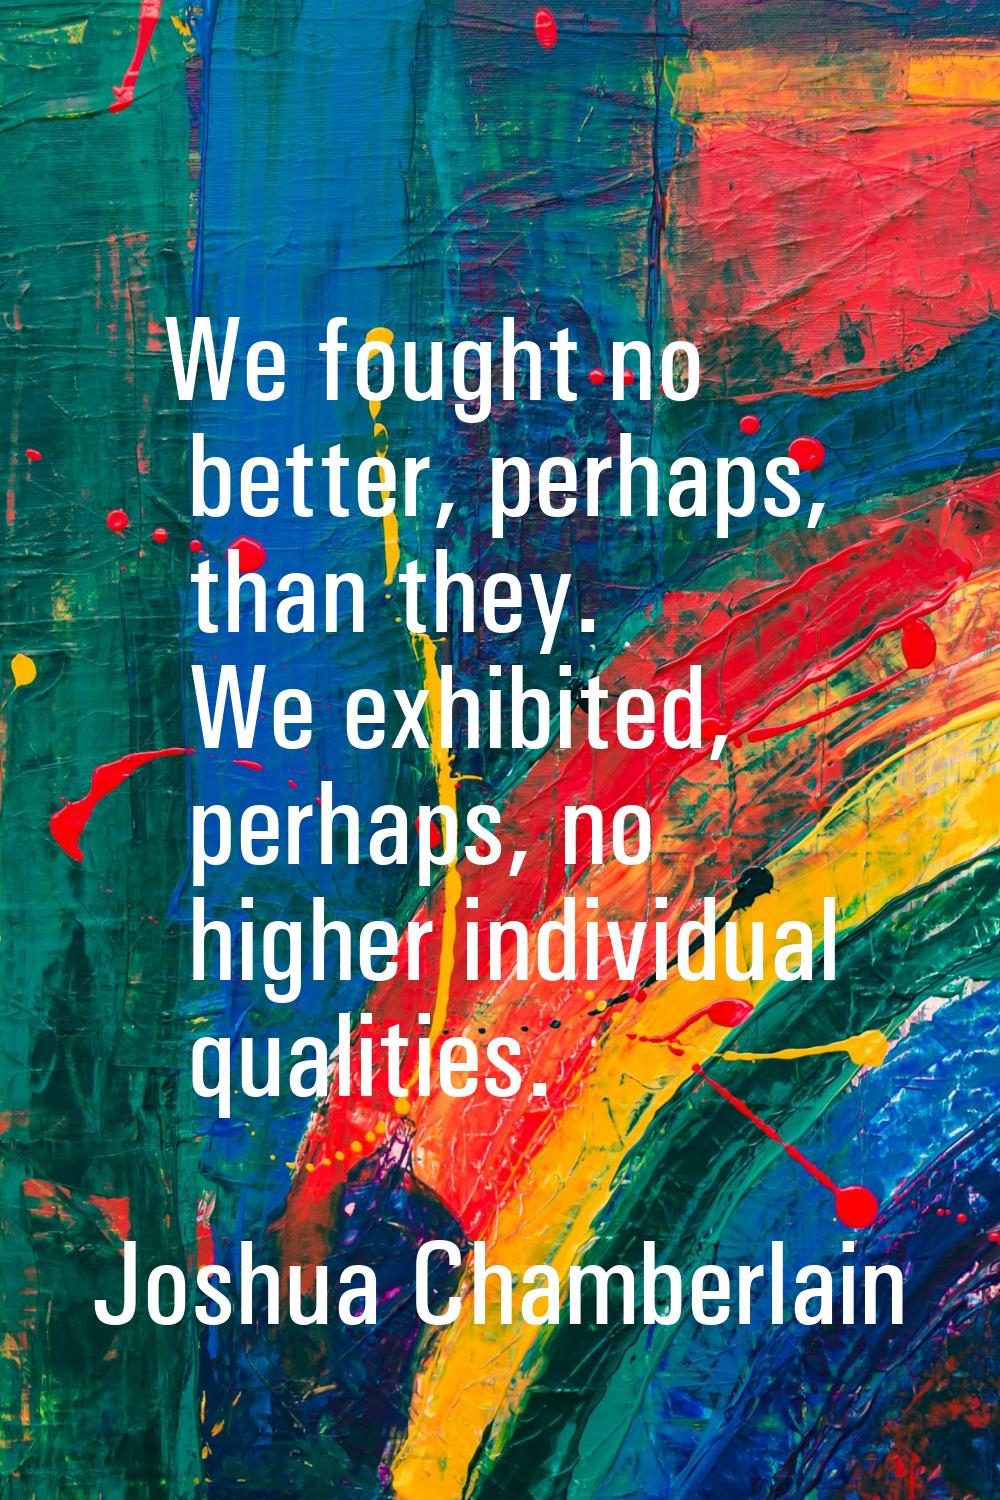 We fought no better, perhaps, than they. We exhibited, perhaps, no higher individual qualities.